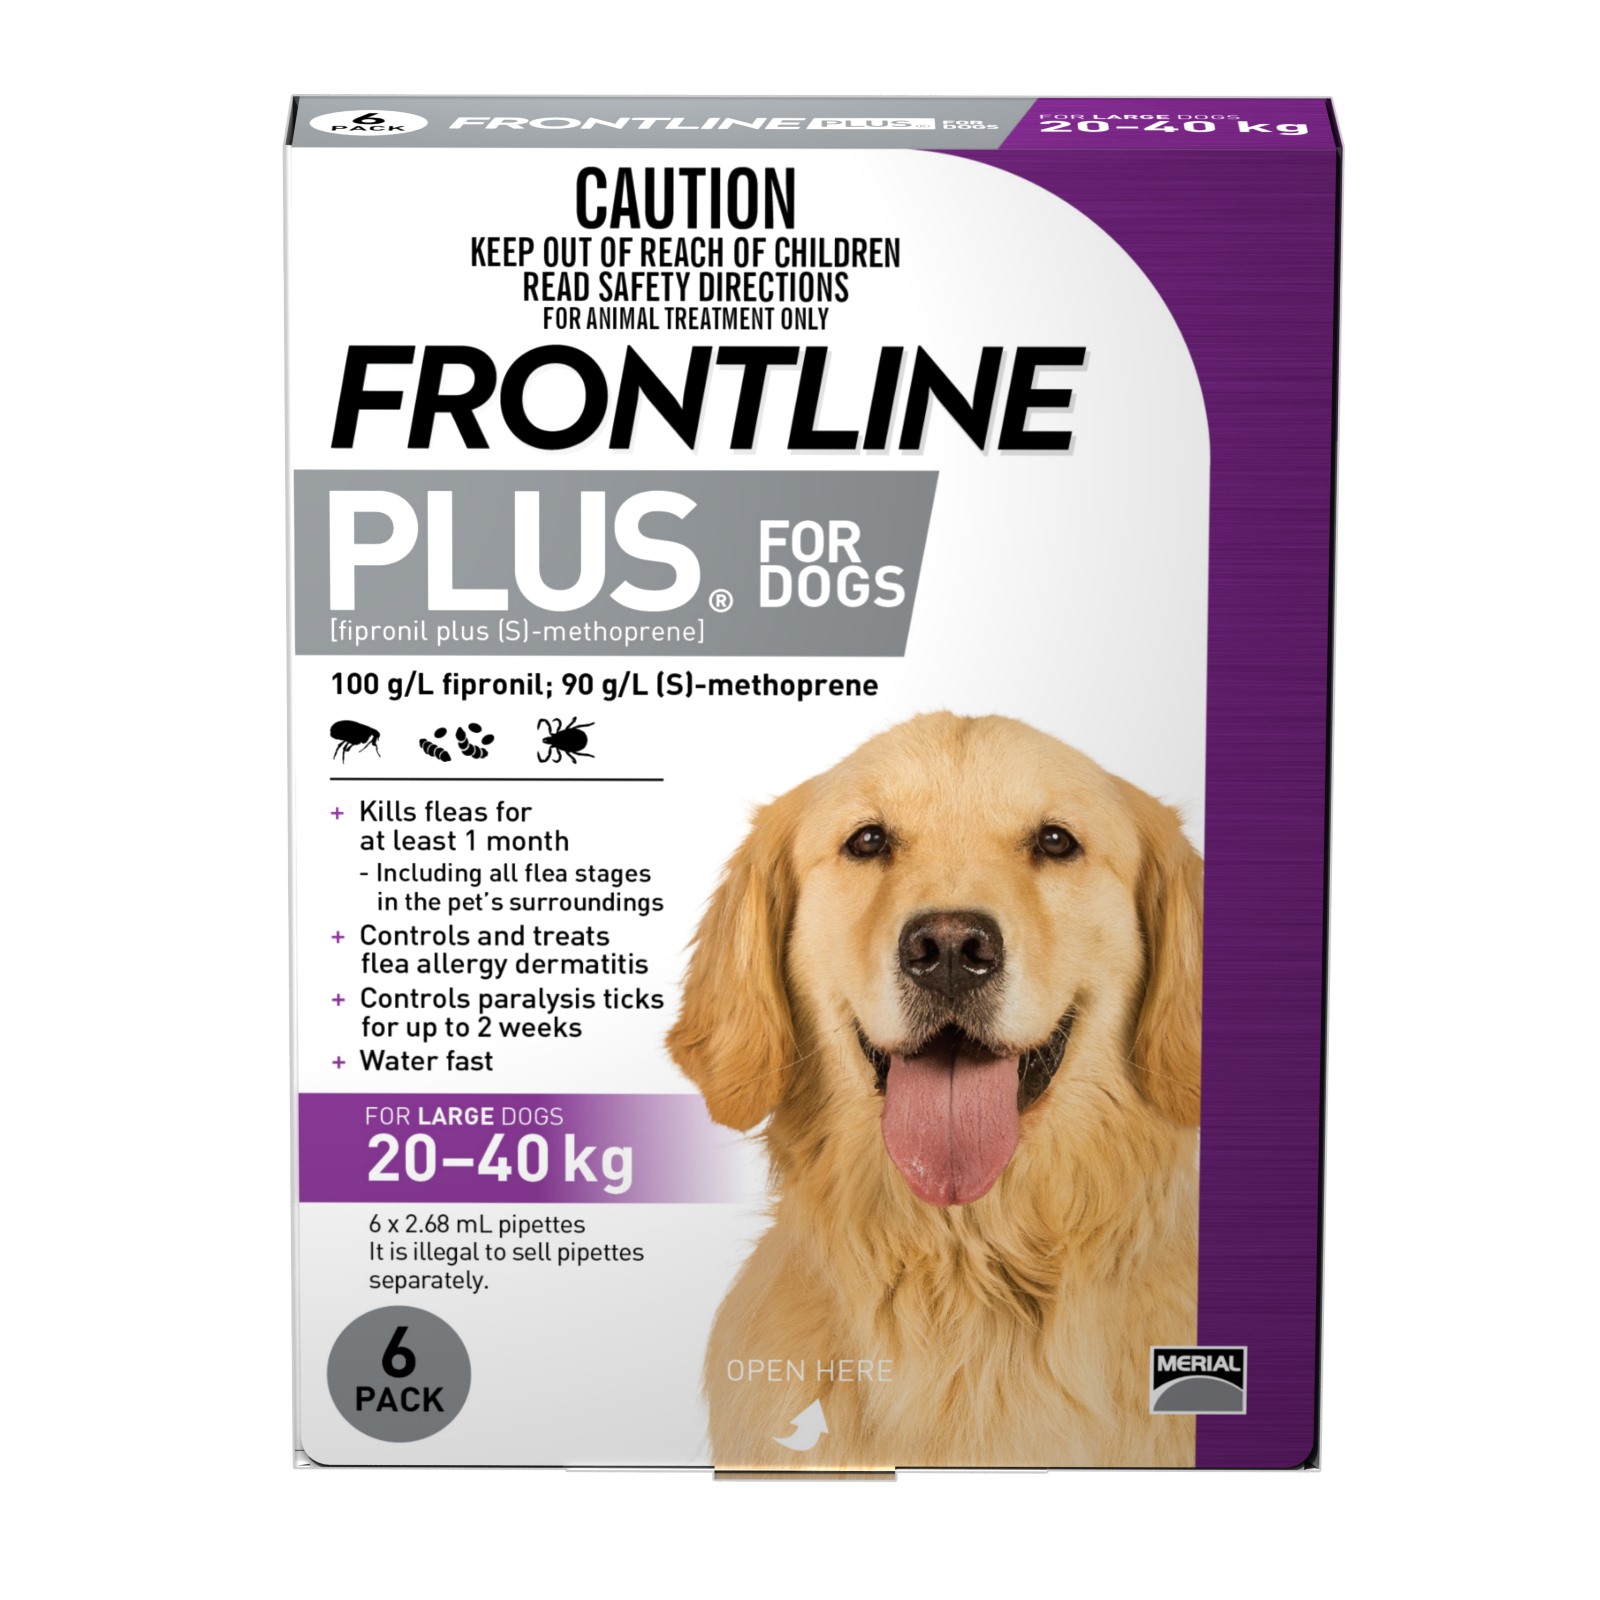 Frontline Plus Flea & Tick Protection for Dogs - 6 Pack image 2